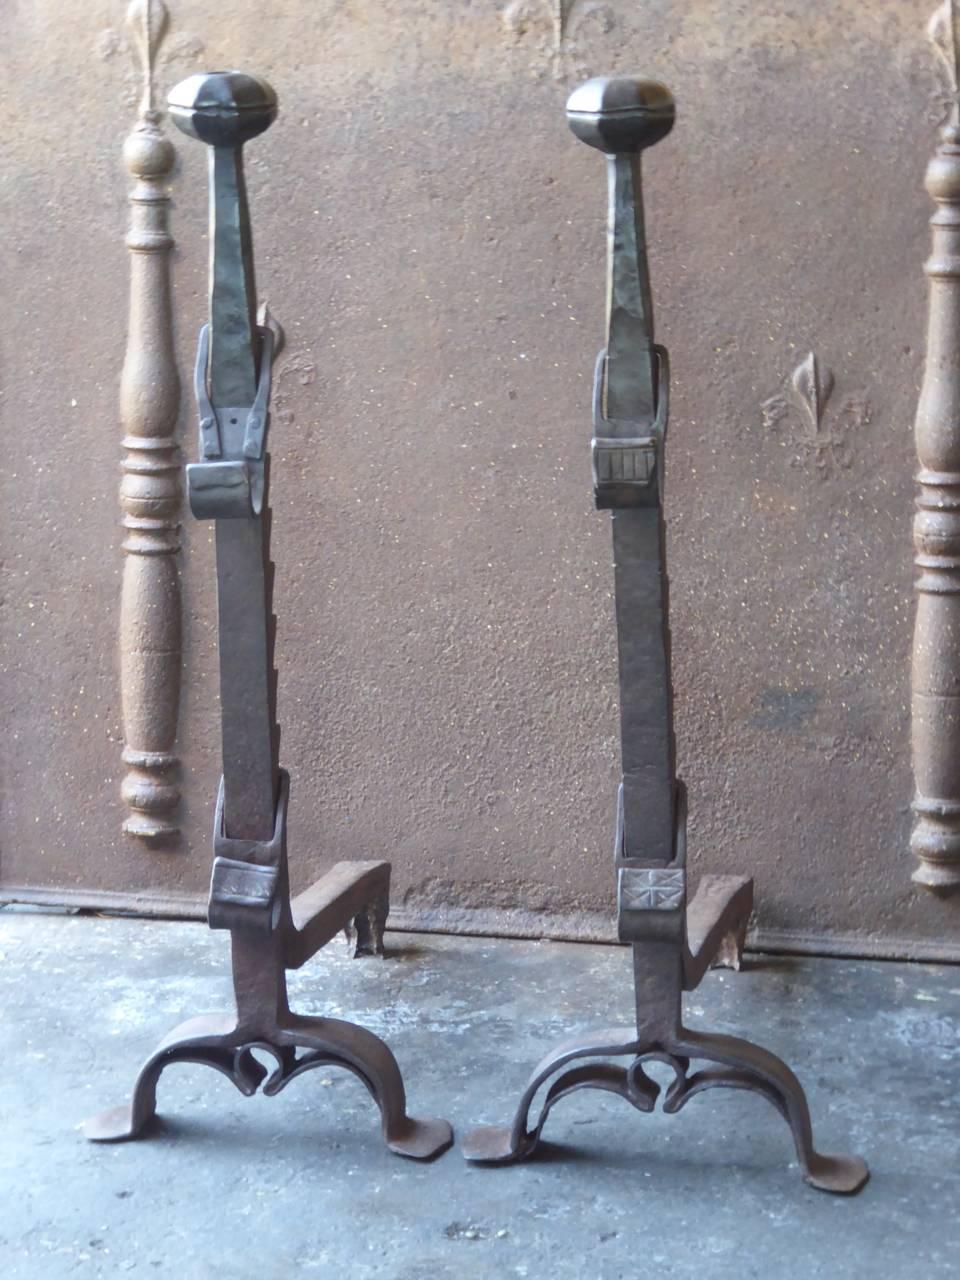 17th century French Gothic andirons made of wrought iron. These French andirons are called 'landiers' in France. This dates from the times the andirons were the main cooking equipment in the house. They had spit hooks to grill meat or poultry and